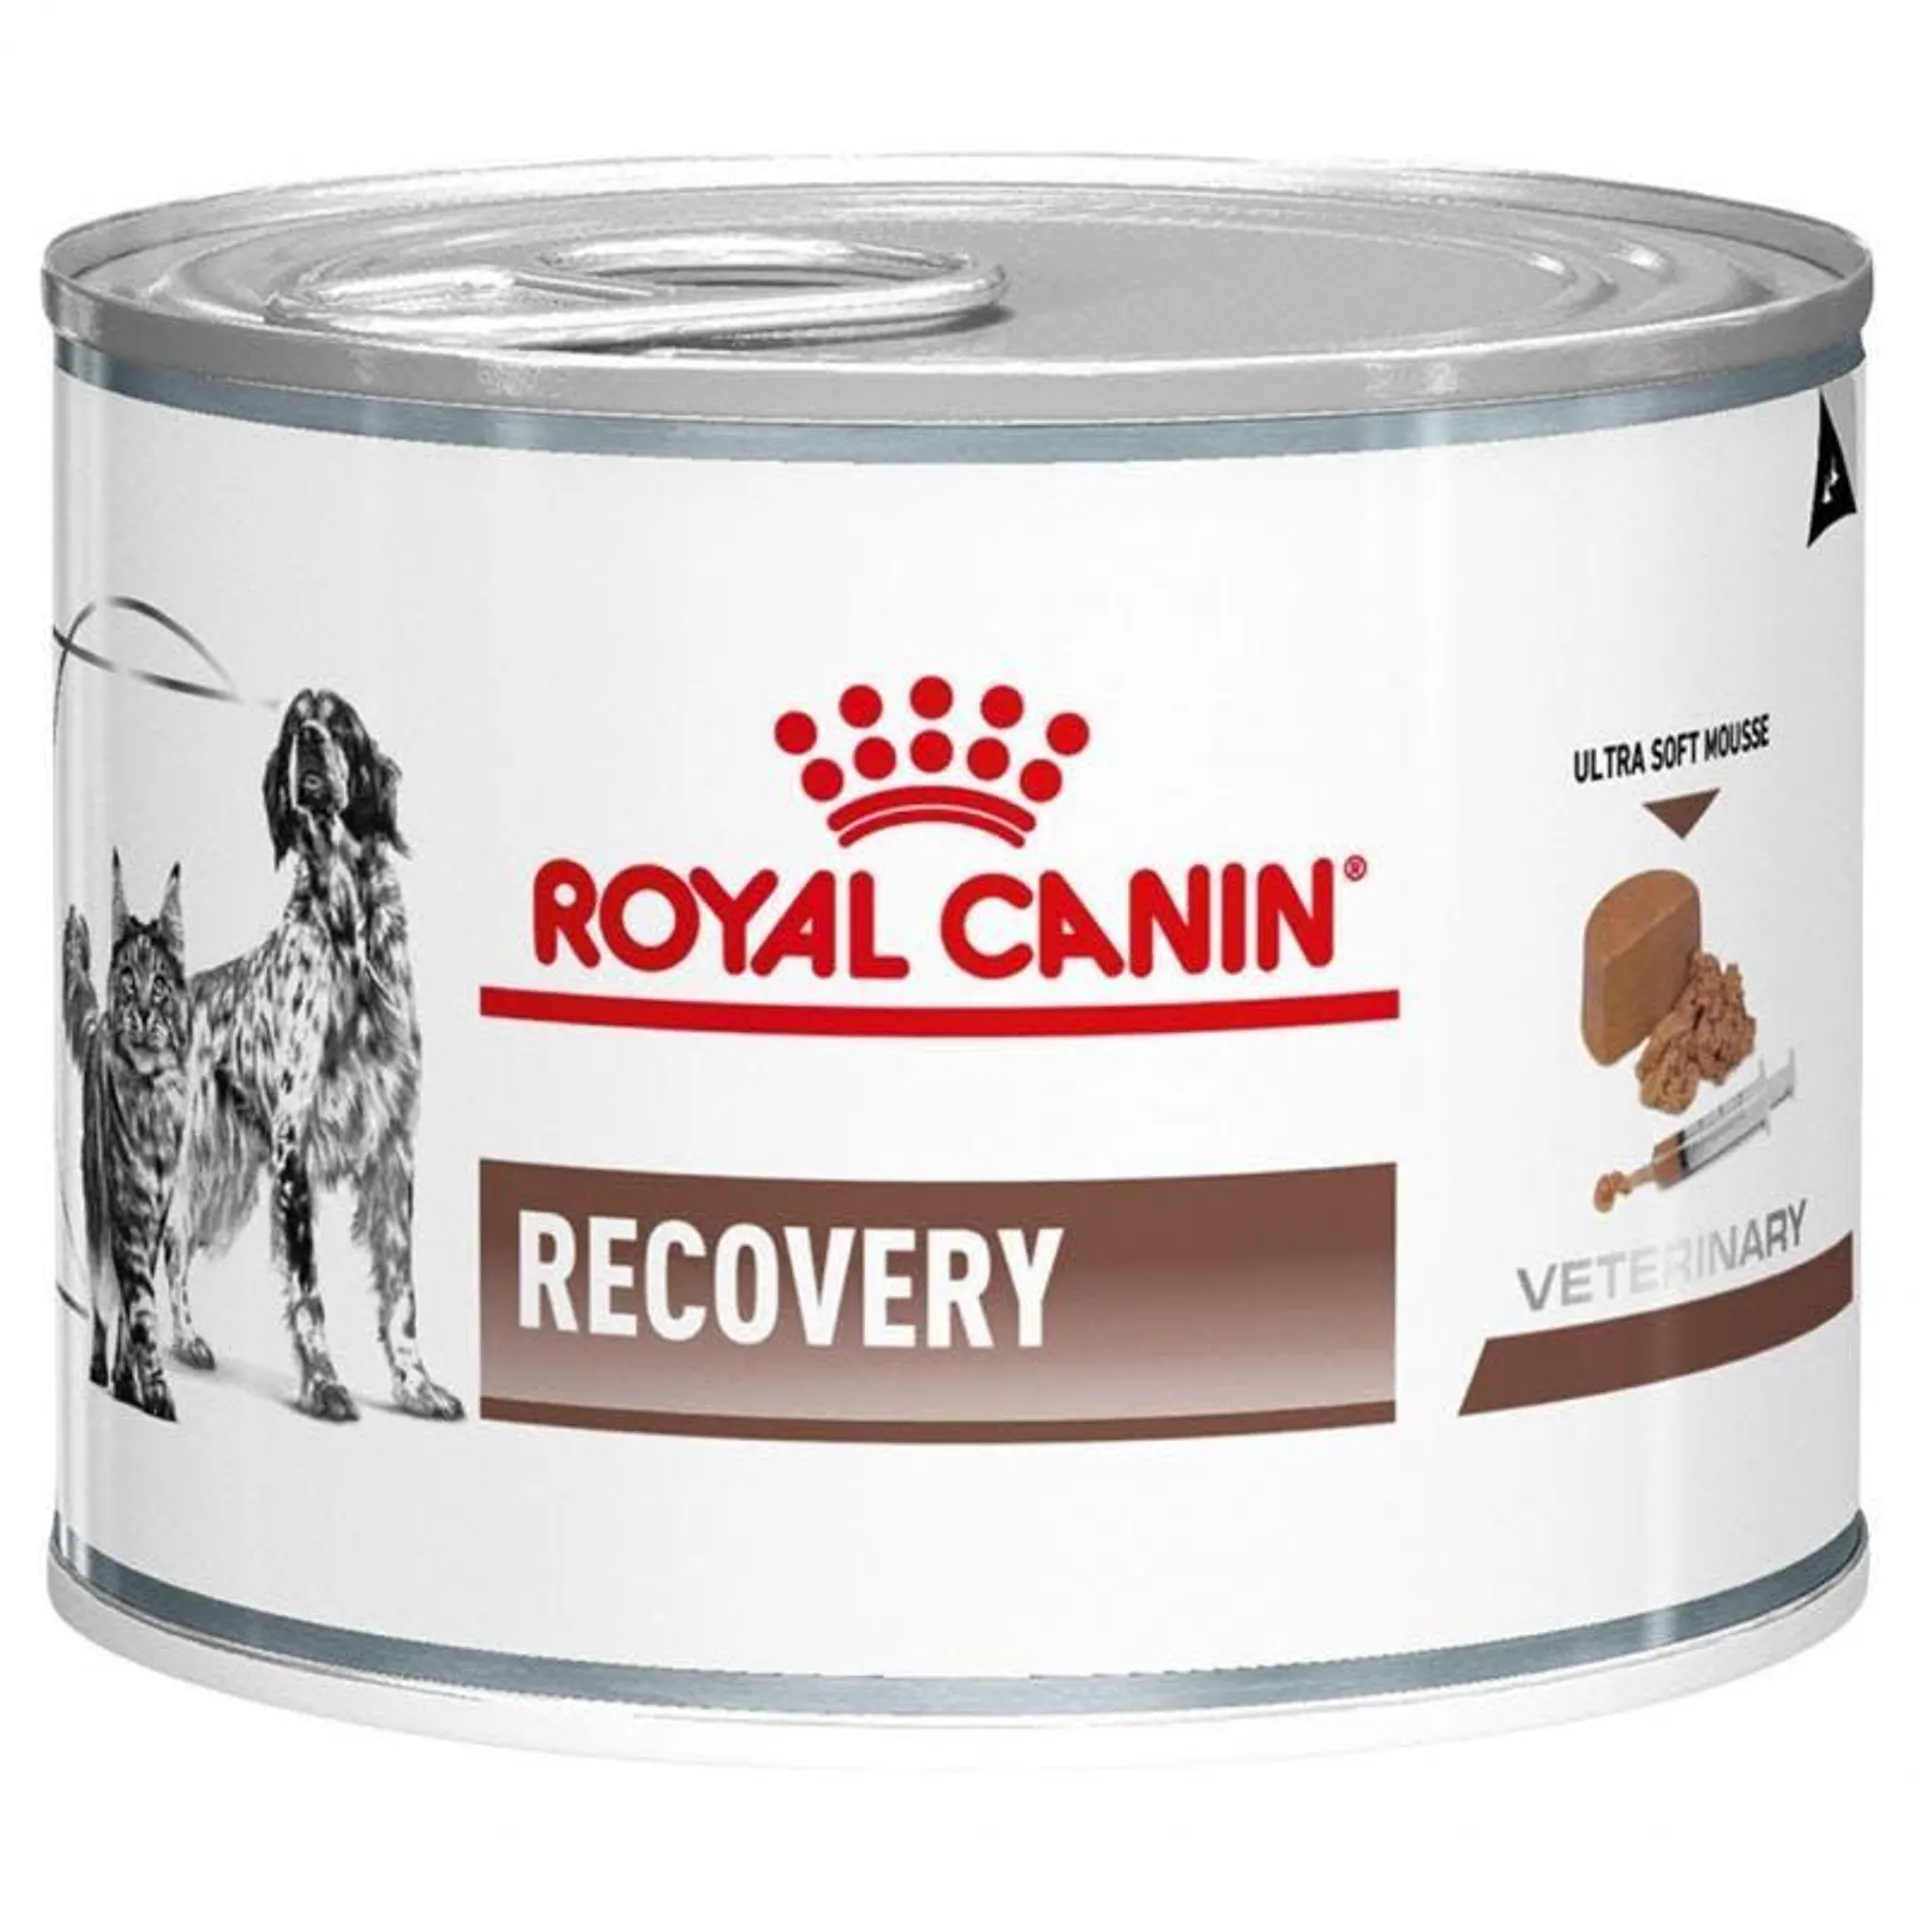 Royal Canin Vet Canine & Feline Recovery Mousse